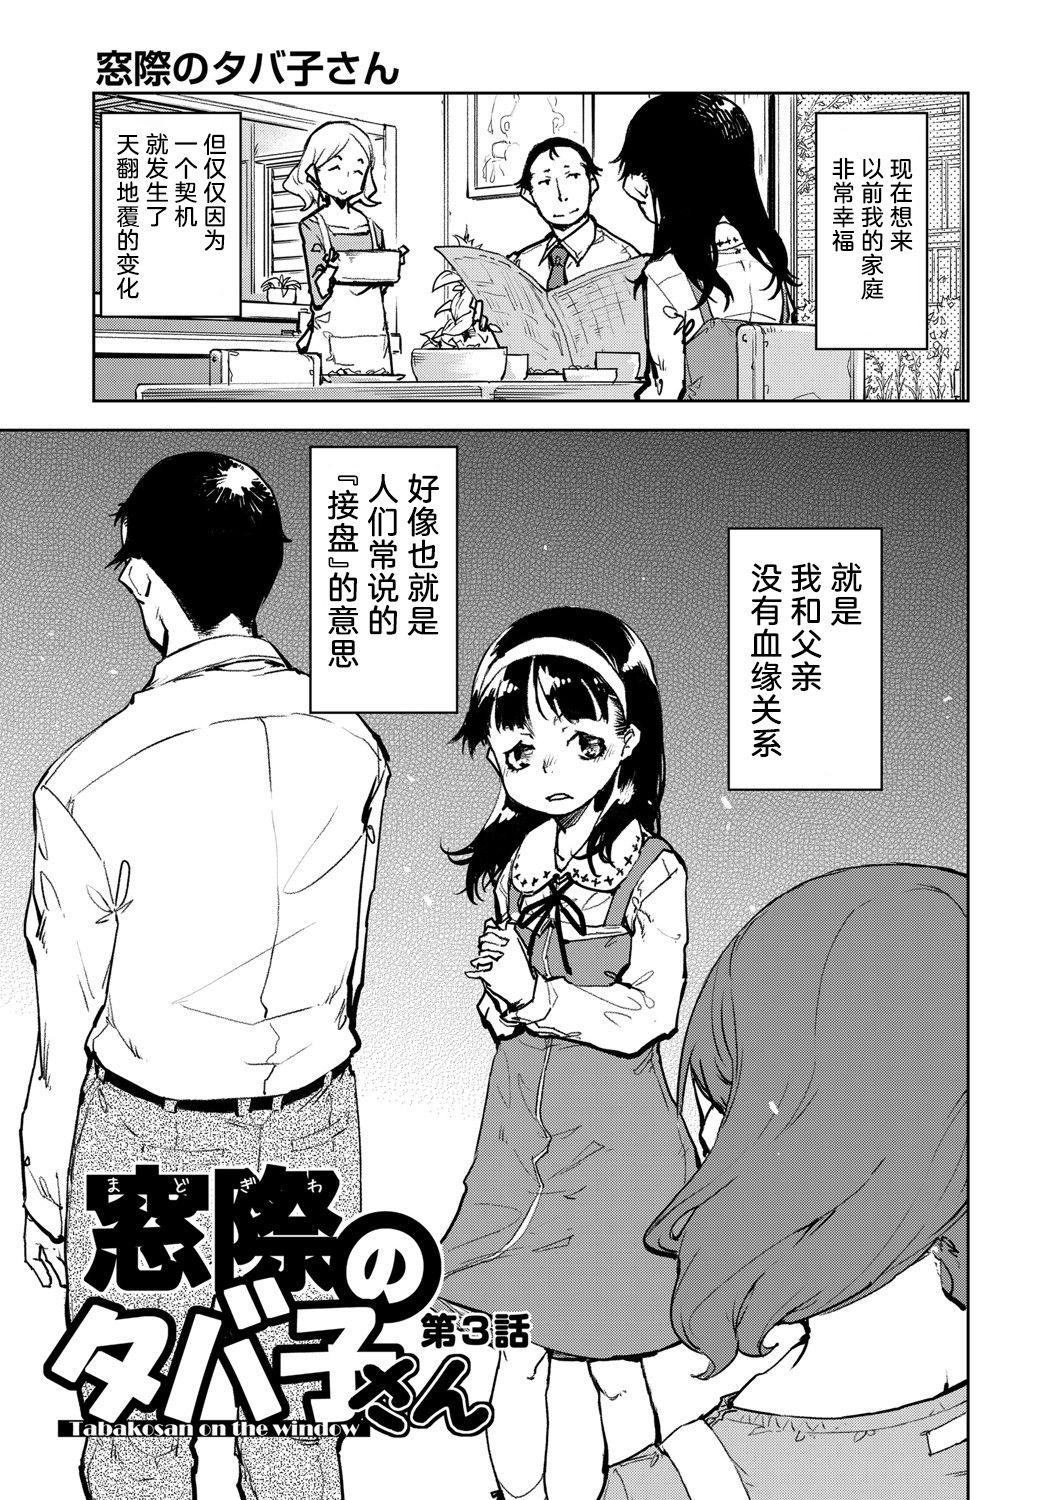 Reverse Cowgirl Tabakosan on the window 3 | 窗边的小烟 第三话 Point Of View - Page 2